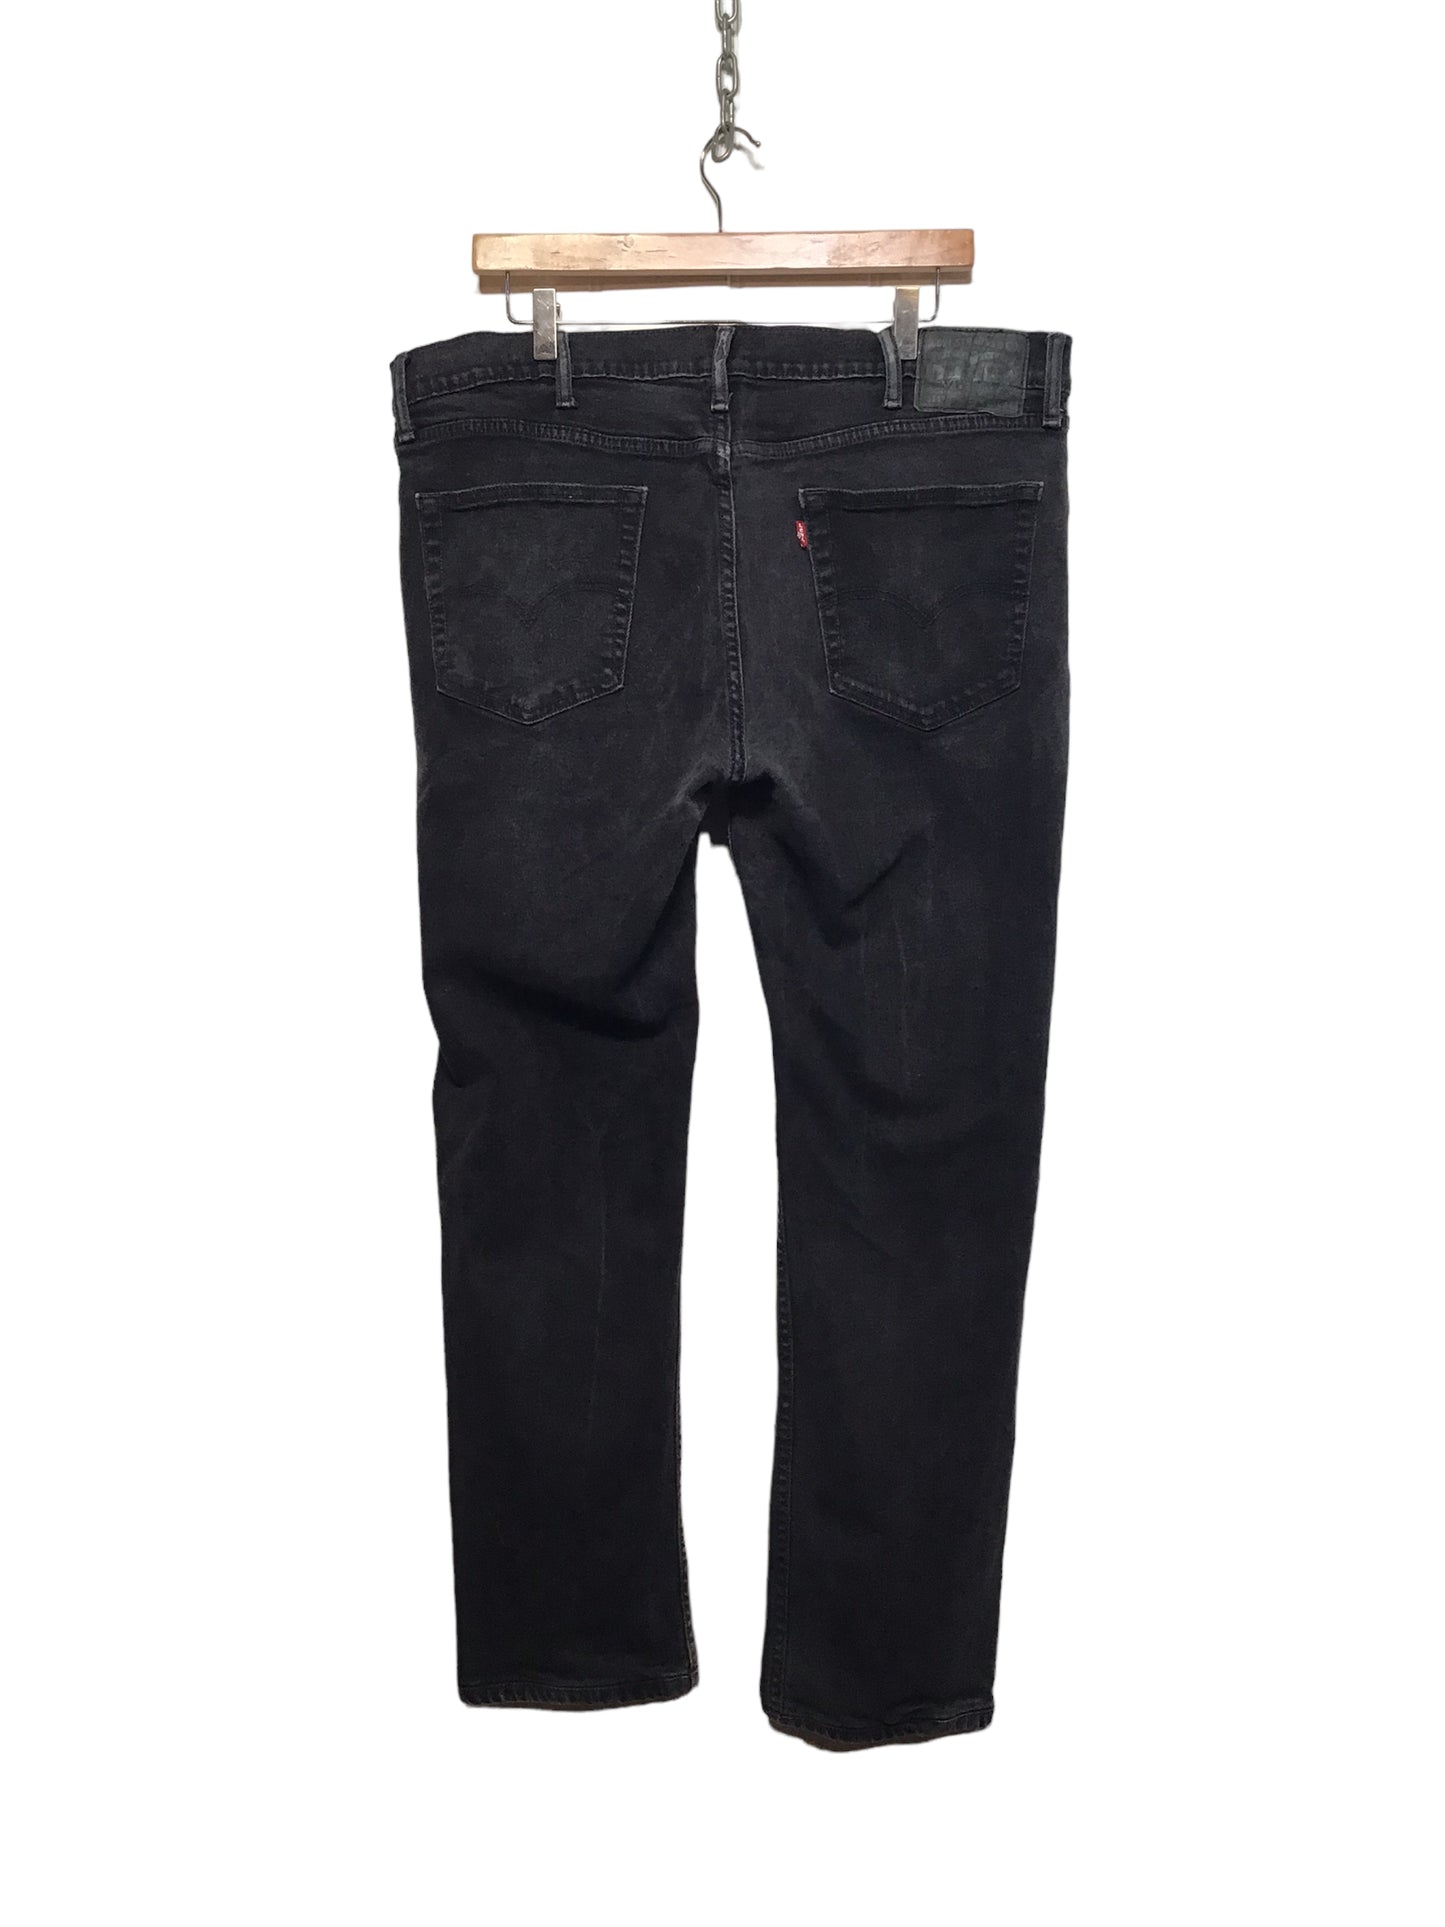 Levi’s Washed Black Jeans (40x28)